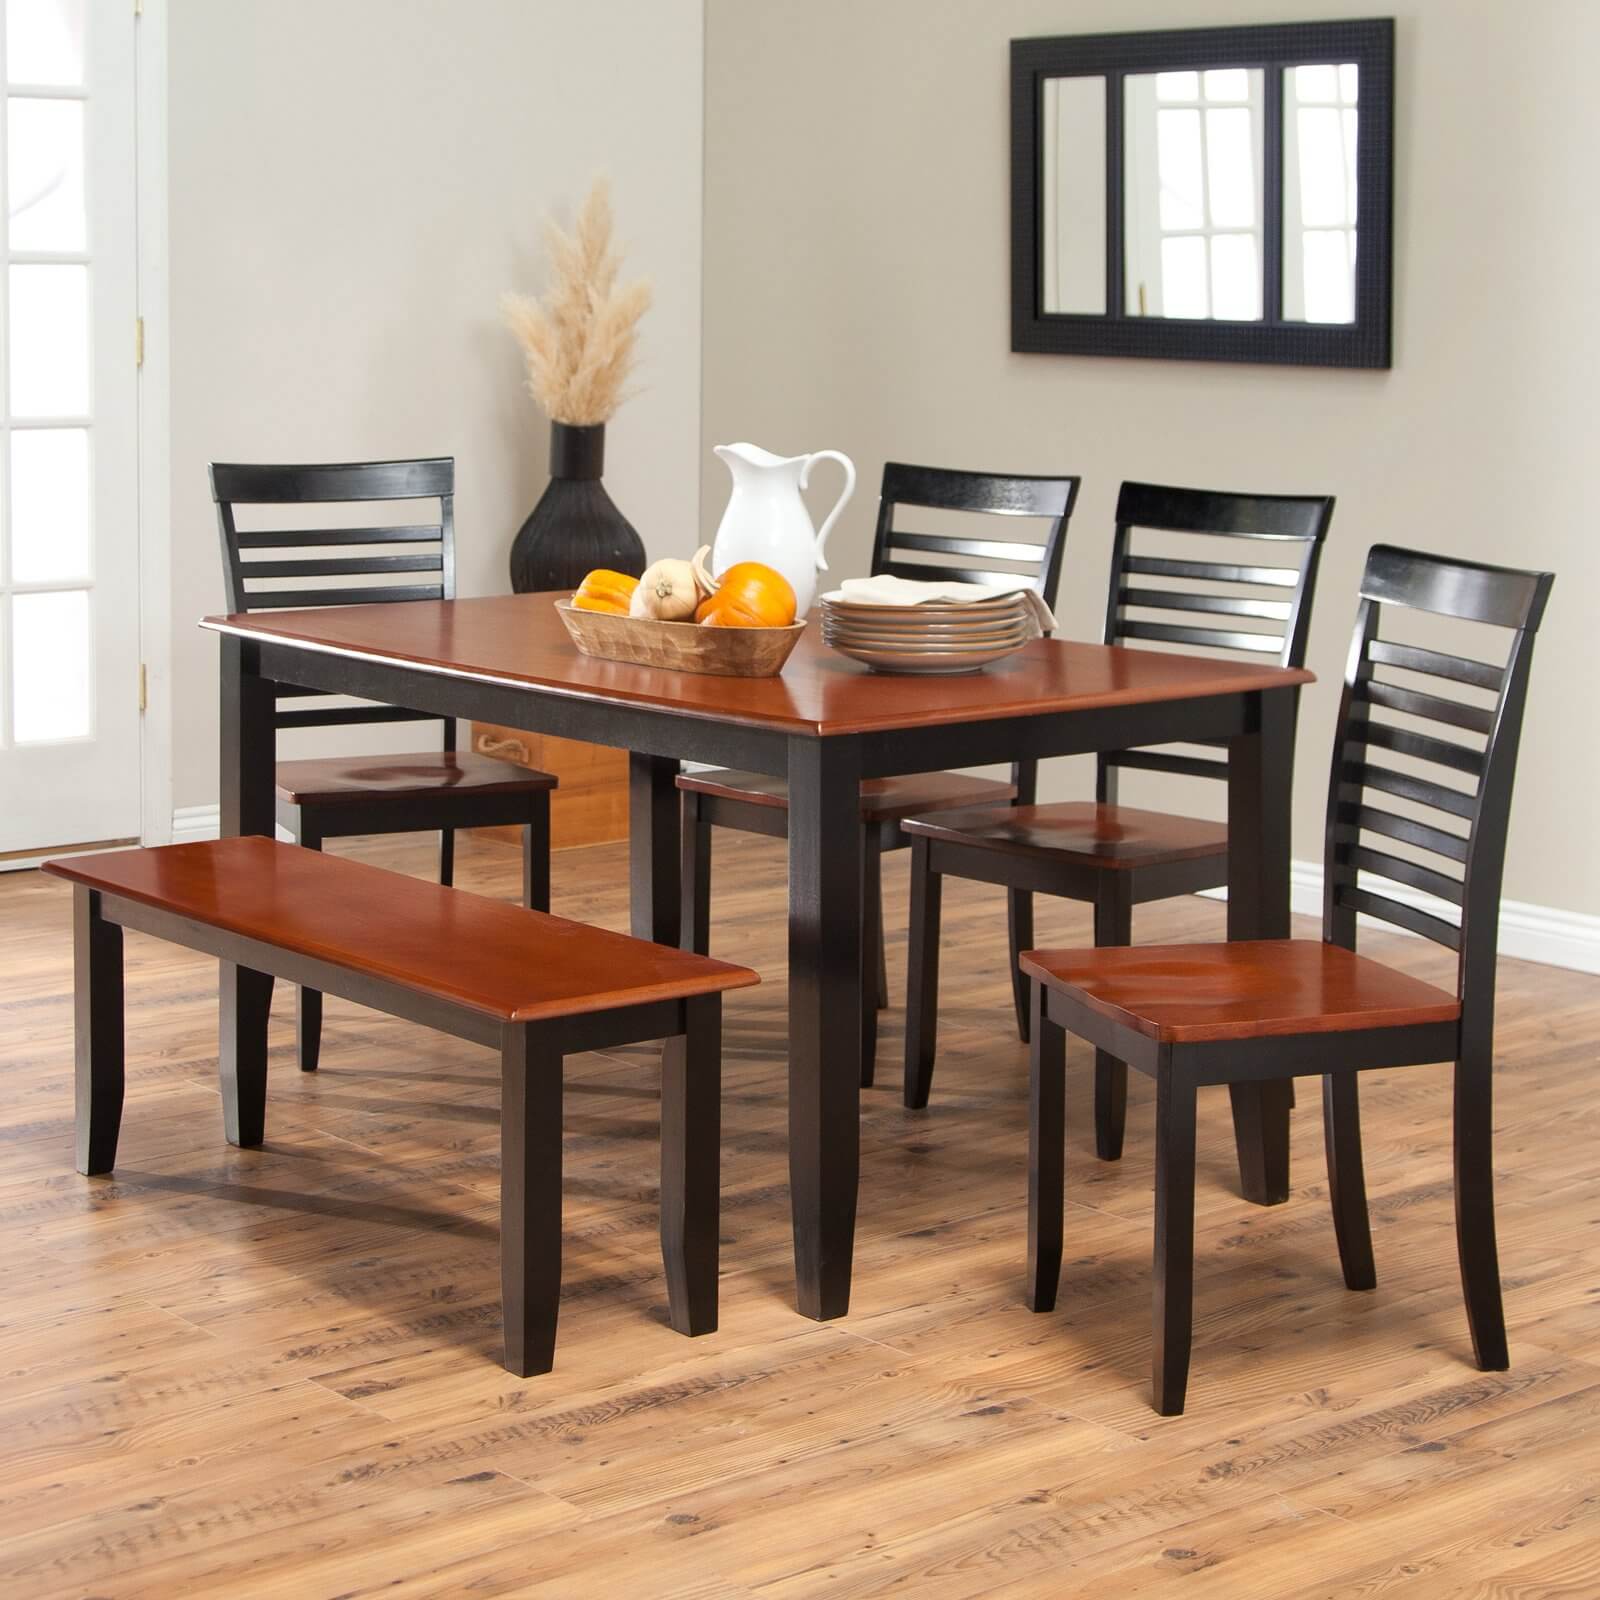 Simple two-toned dining set with bench. The seats and table top are cherry